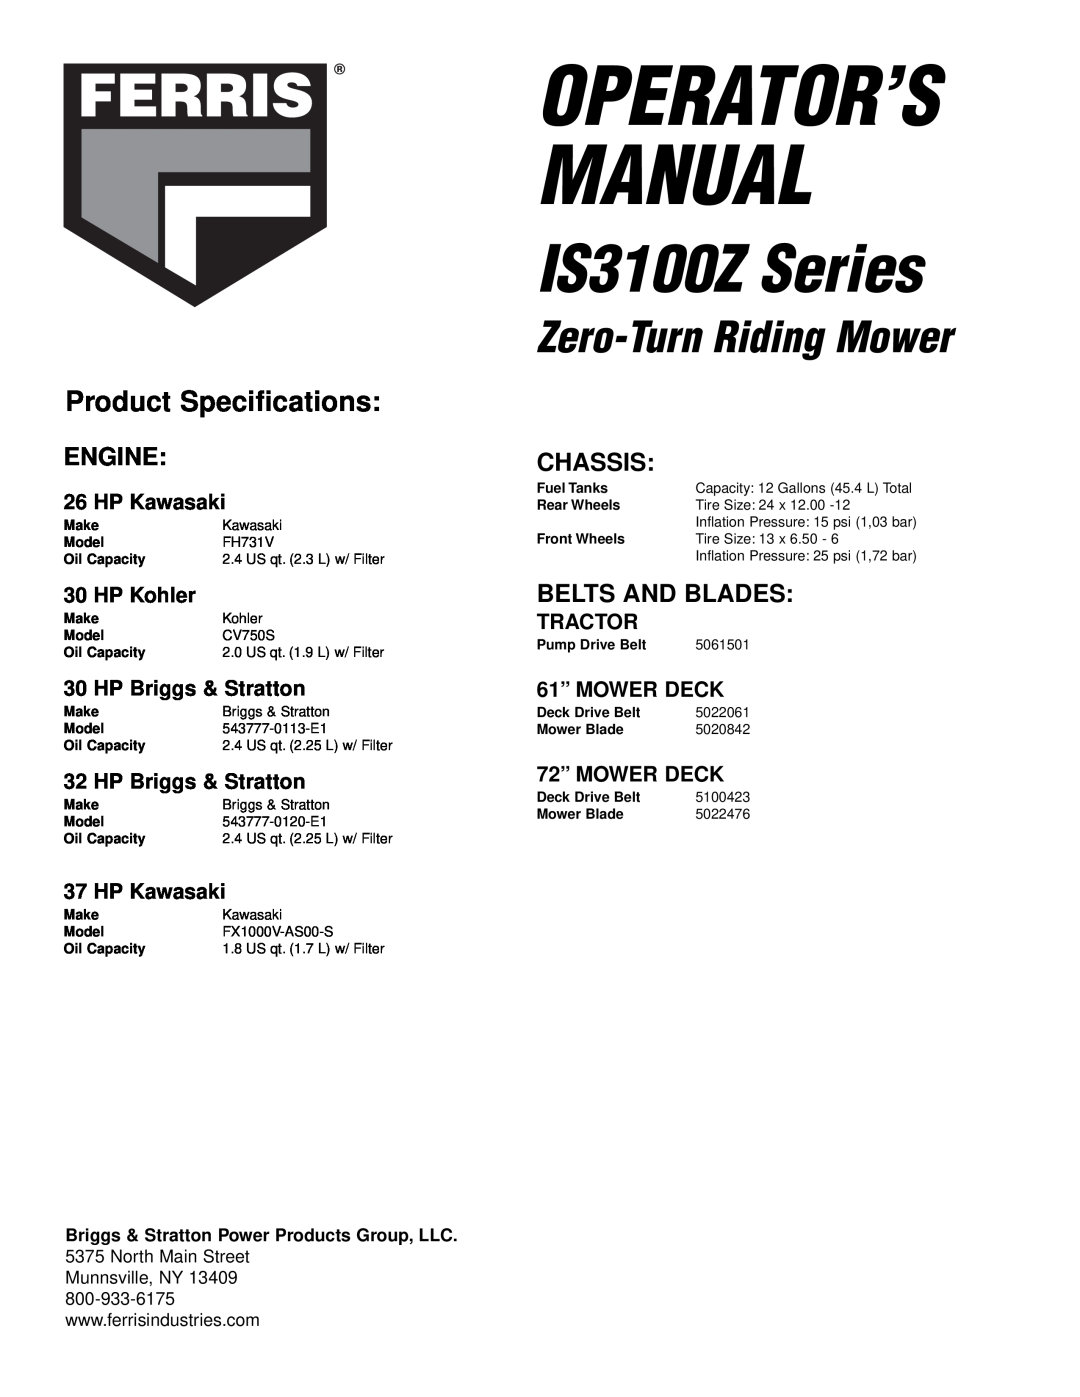 Briggs & Stratton 5900718 Product Specifications, Belts And Blades, IS3100Z Series, Operator’S Manual, Engine, Chassis 